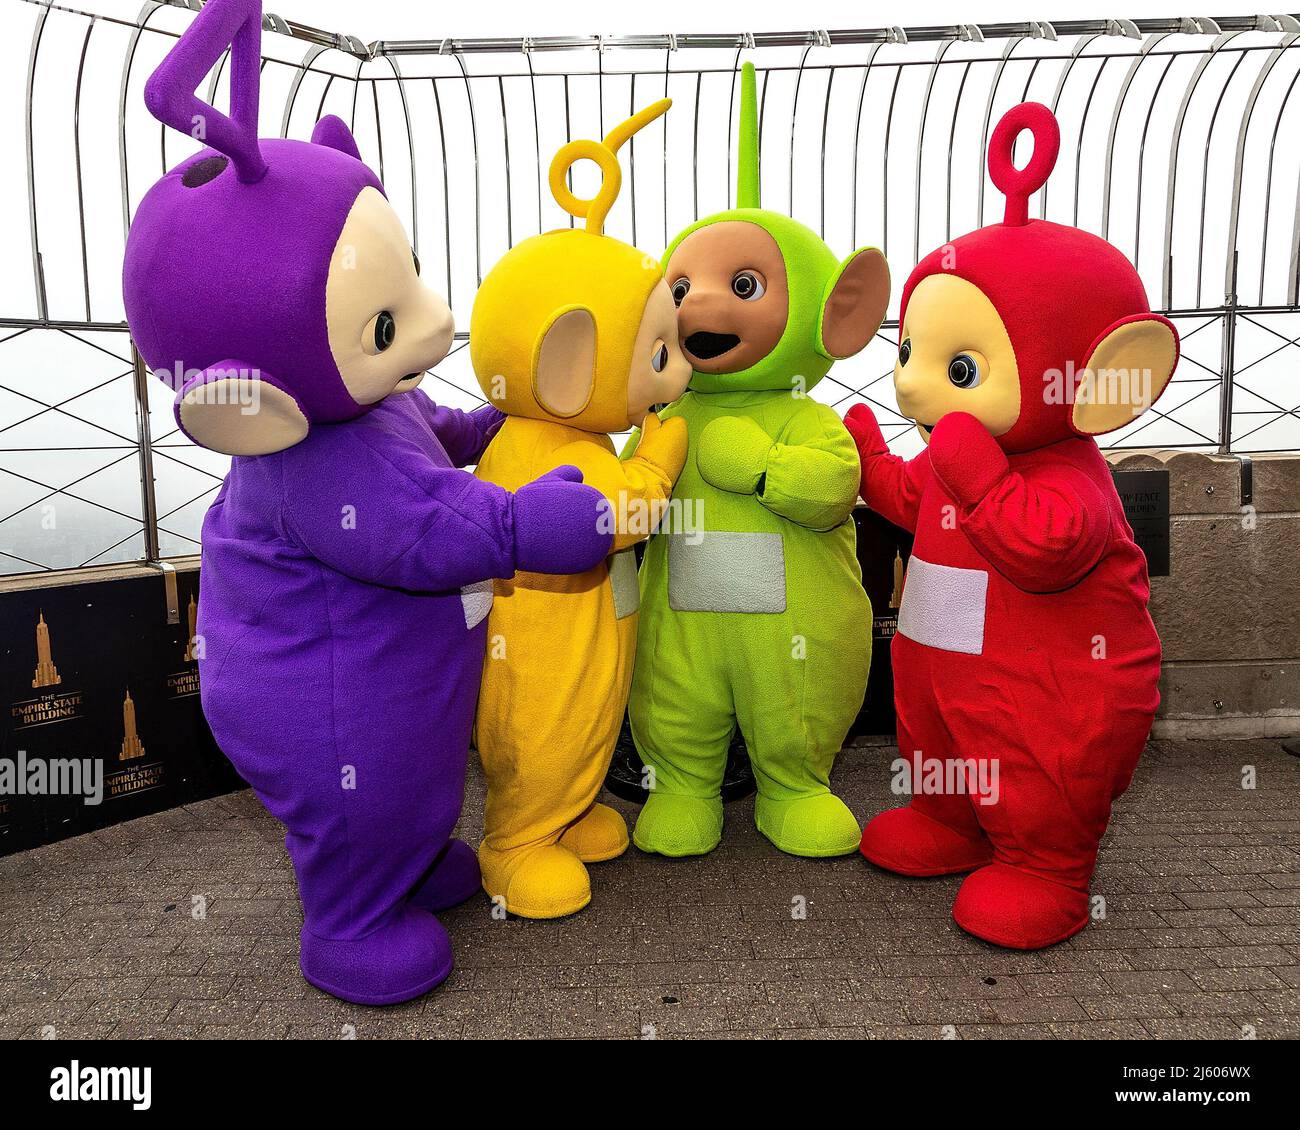 New York, NY, USA. 26th Apr, 2022. Tinky Winky, Laa-Laa, Dipsy, Po at the Teletubbies ceremonial lighting of the Empire State Building in their iconic colors of purple, green, yellow and red in celebration of their 25th Anniversary year at The Empire State Building. Credit: Steve Mack/Alamy Live News Stock Photo